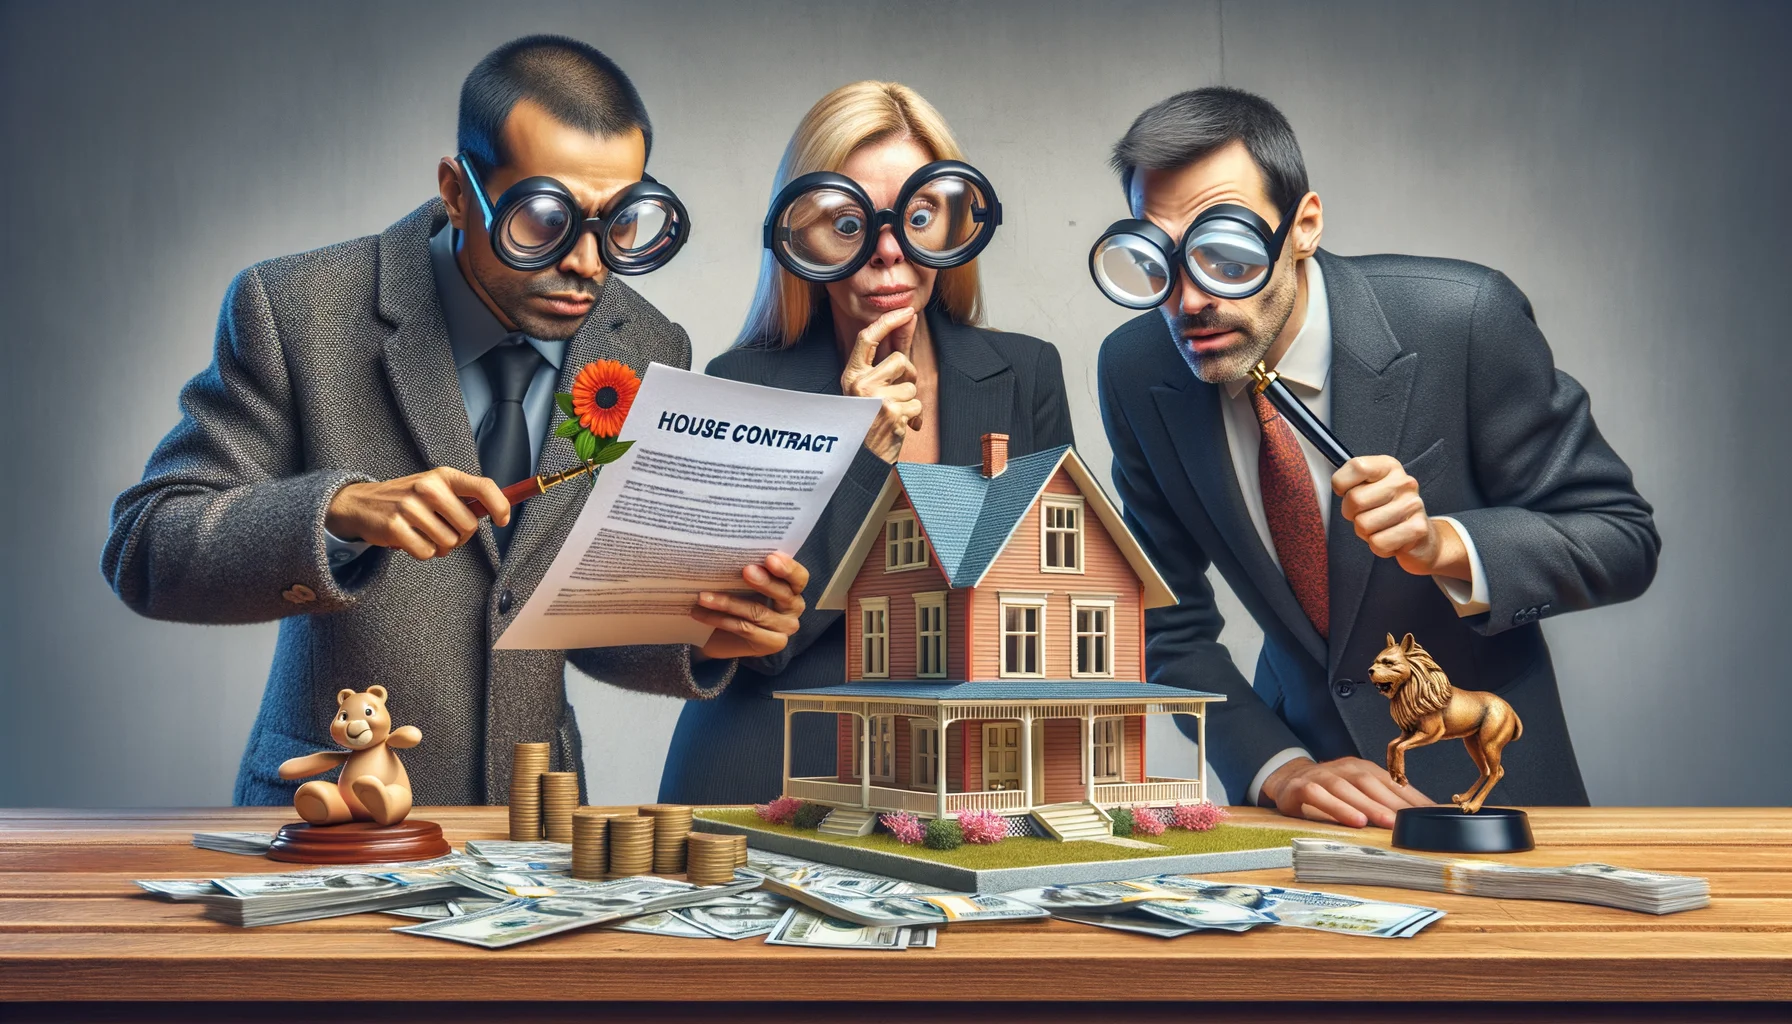 Create a comedic, realistic image that highlights typical errors in the home purchasing process, but in an ideal setting. The image can showcase a prospective home-buyer, depicted as a mixed race and gender pair, reviewing a house contract with exaggeratedly large reading glasses, symbolizing overlooked details. Next to them is a home inspector with a magnifying glass, South Asian male, peering into a tiny model home teetering precariously on a pedestal. Nearby, a Caucasian female realtor is laughing behind a pile of money, suggesting inflated costs. This image is intended to identify and mock common mistakes to avoid when buying a home.